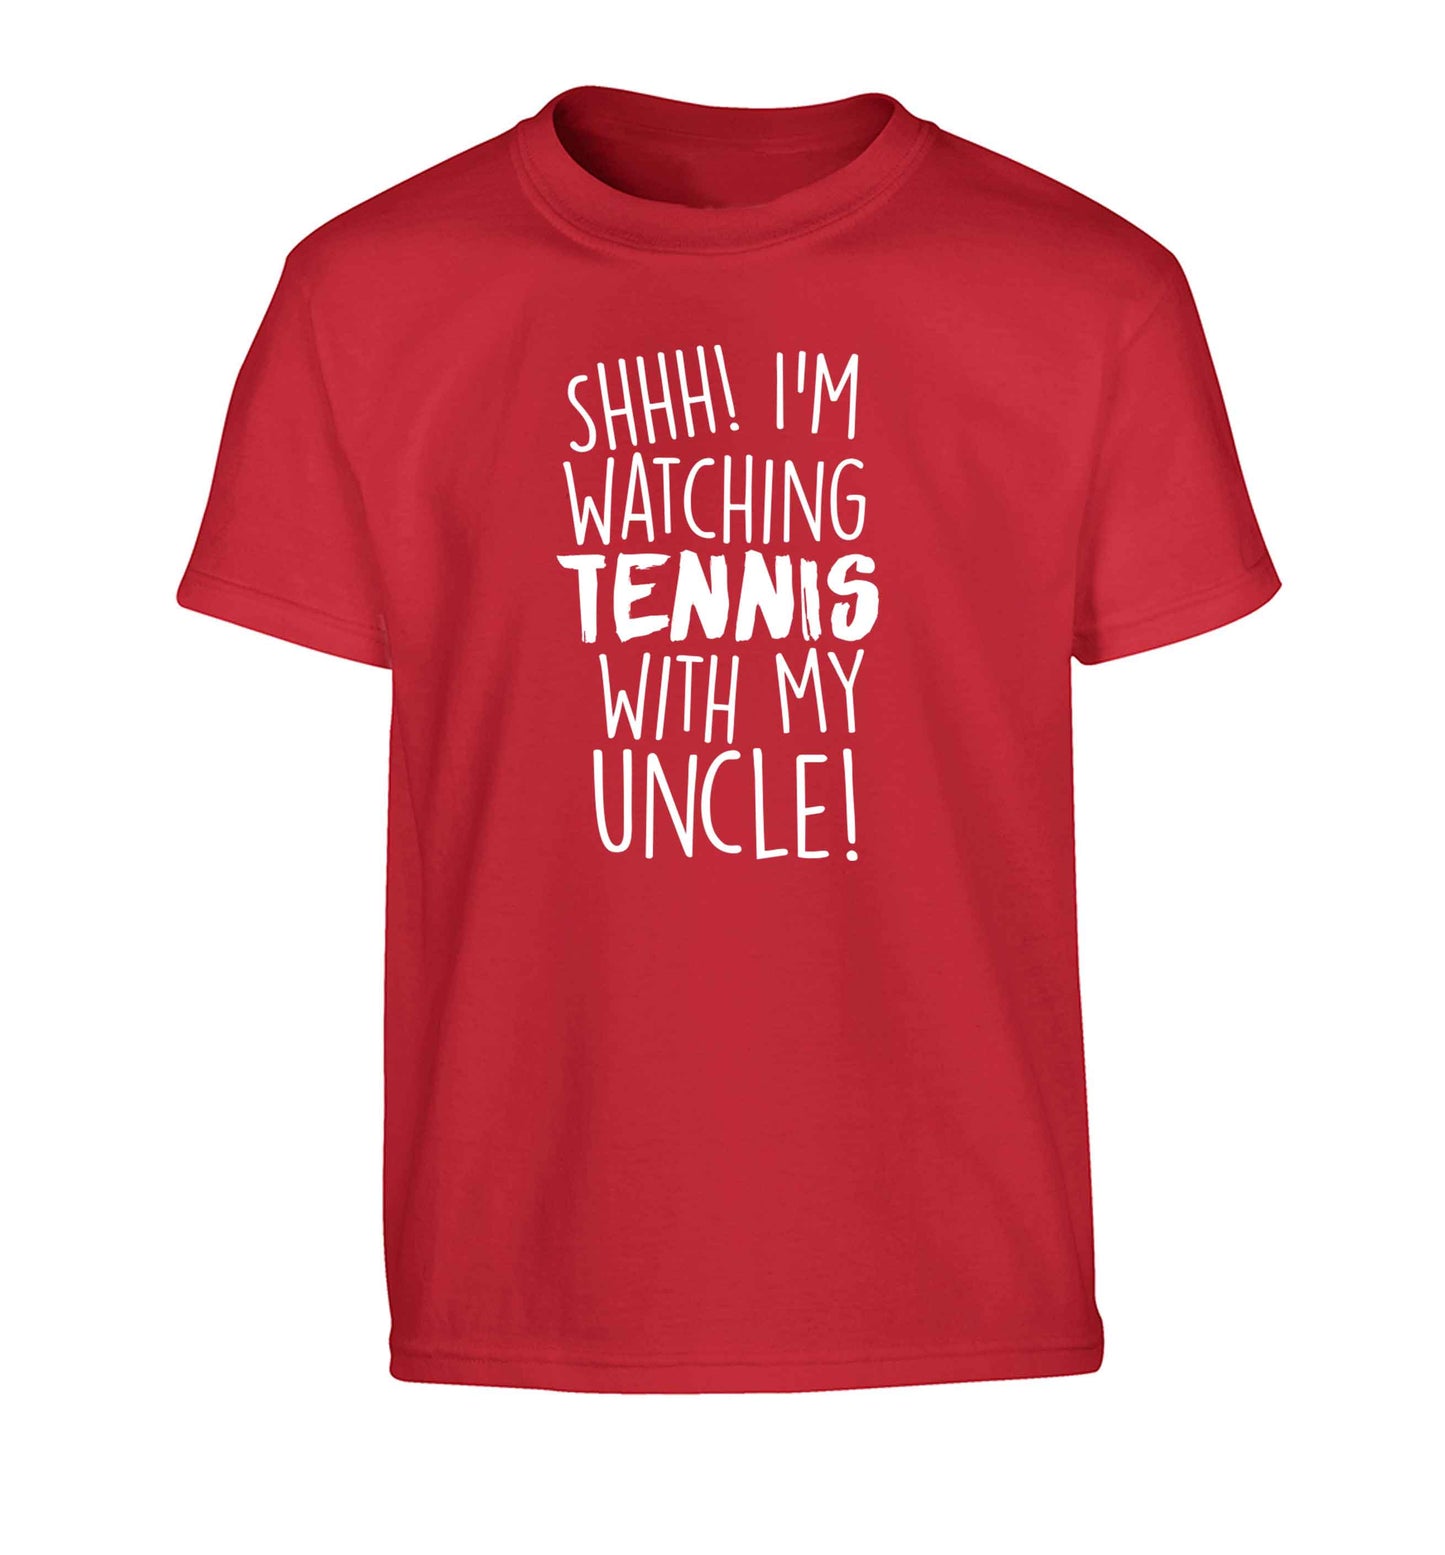 Shh! I'm watching tennis with my uncle! Children's red Tshirt 12-13 Years